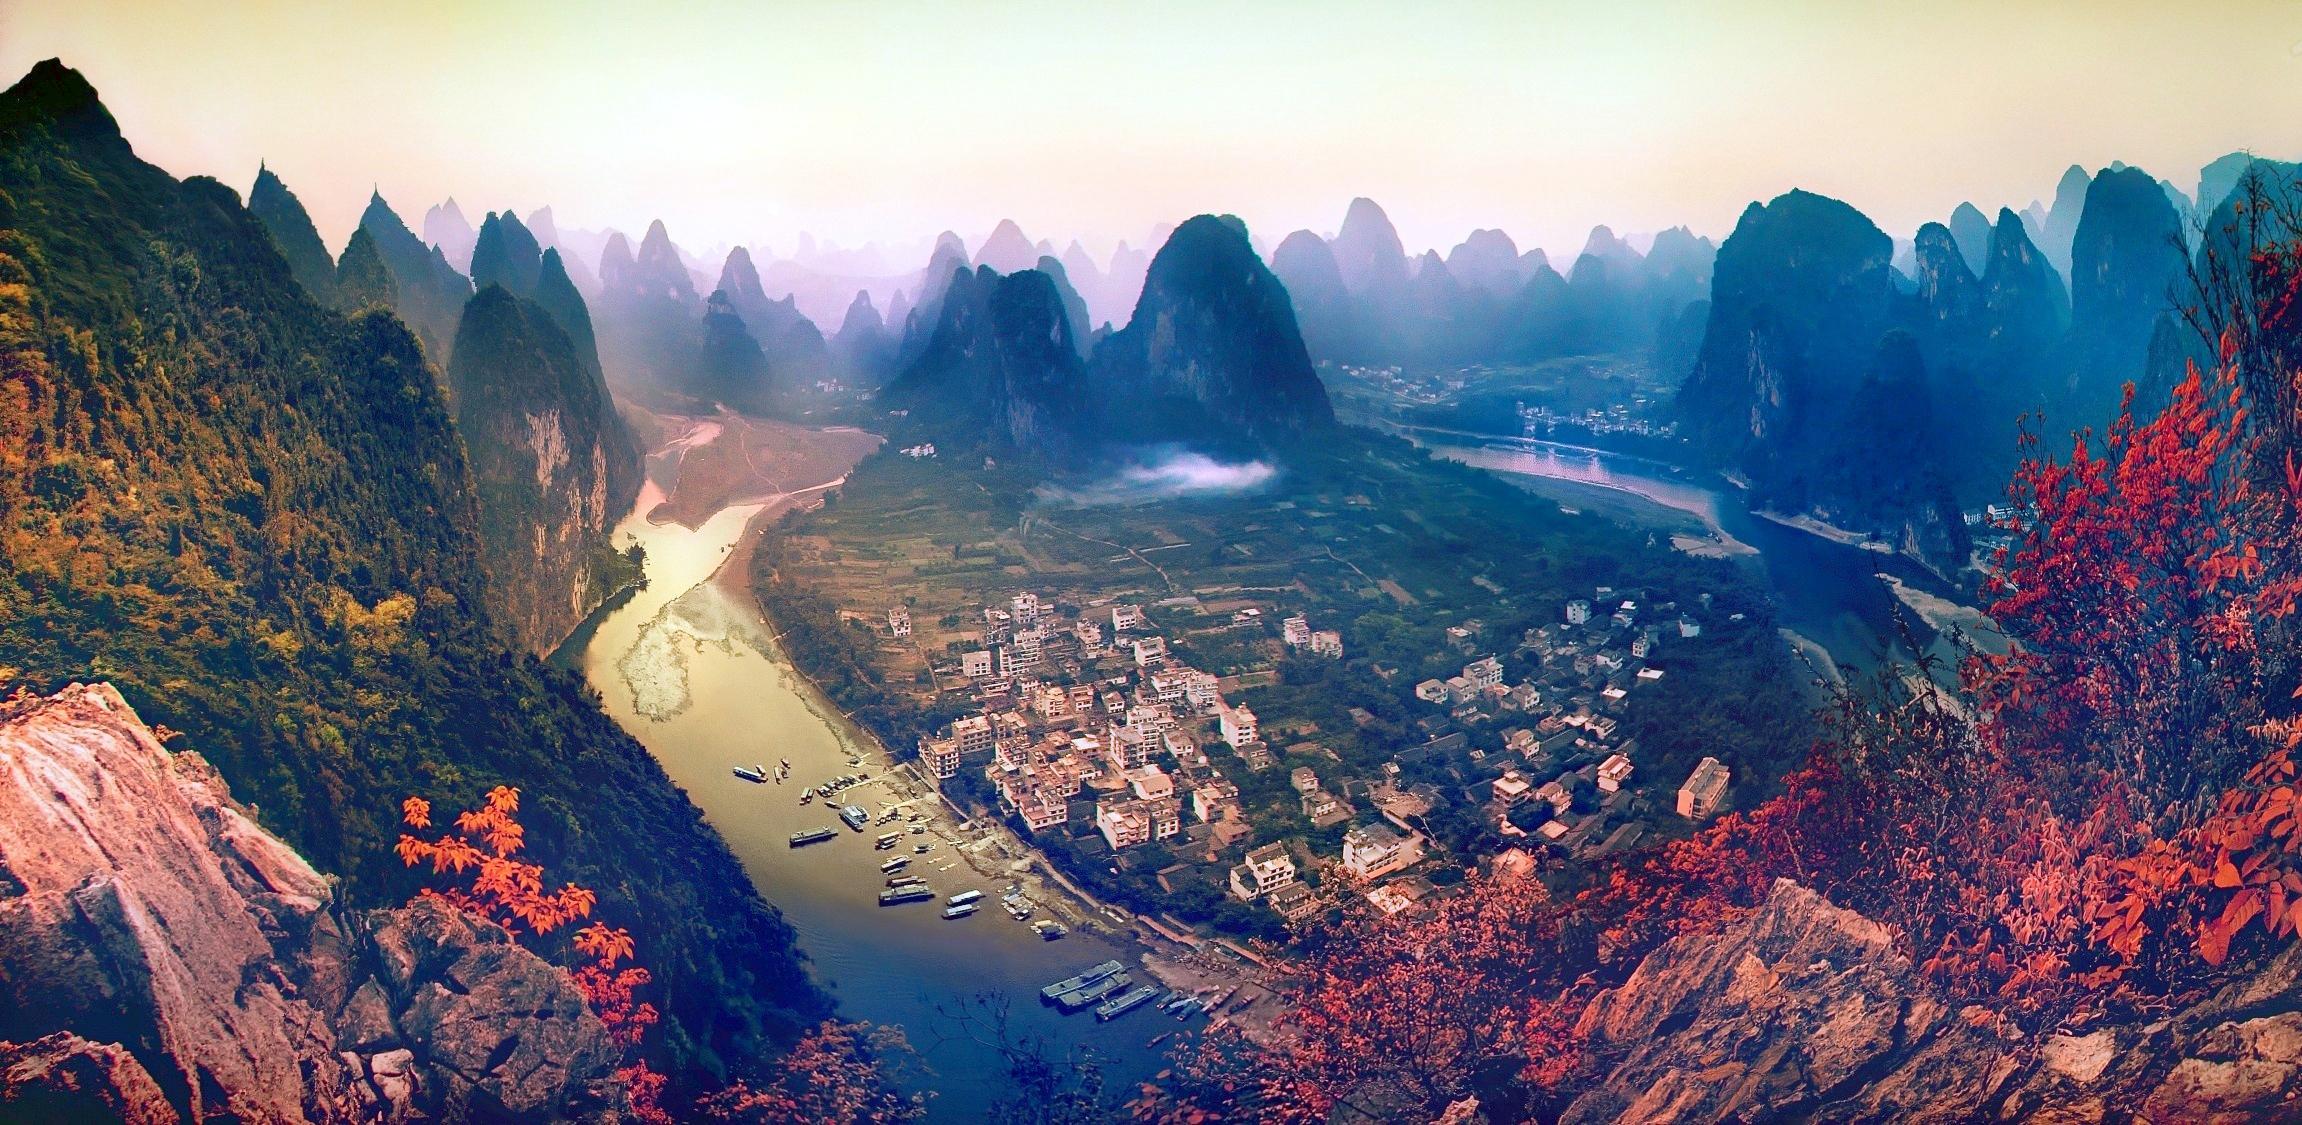 forest, mountains, town, sunset, fog, river, magical, China, beautiful, boats, autumn, buildings wallpaper